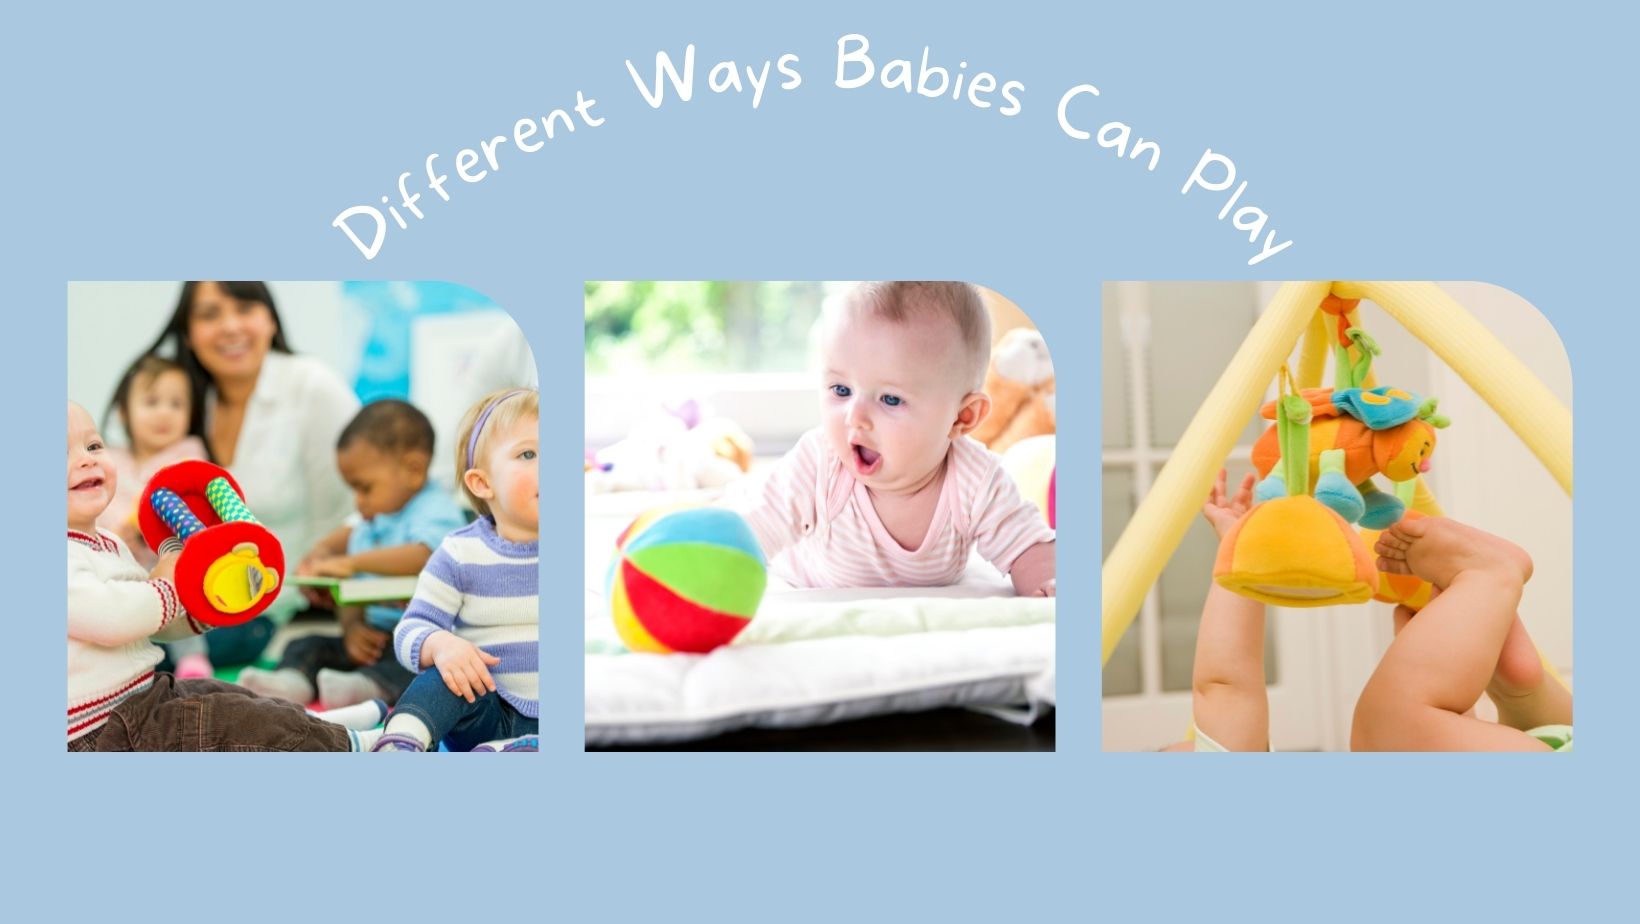 Different Ways Babies Can Play